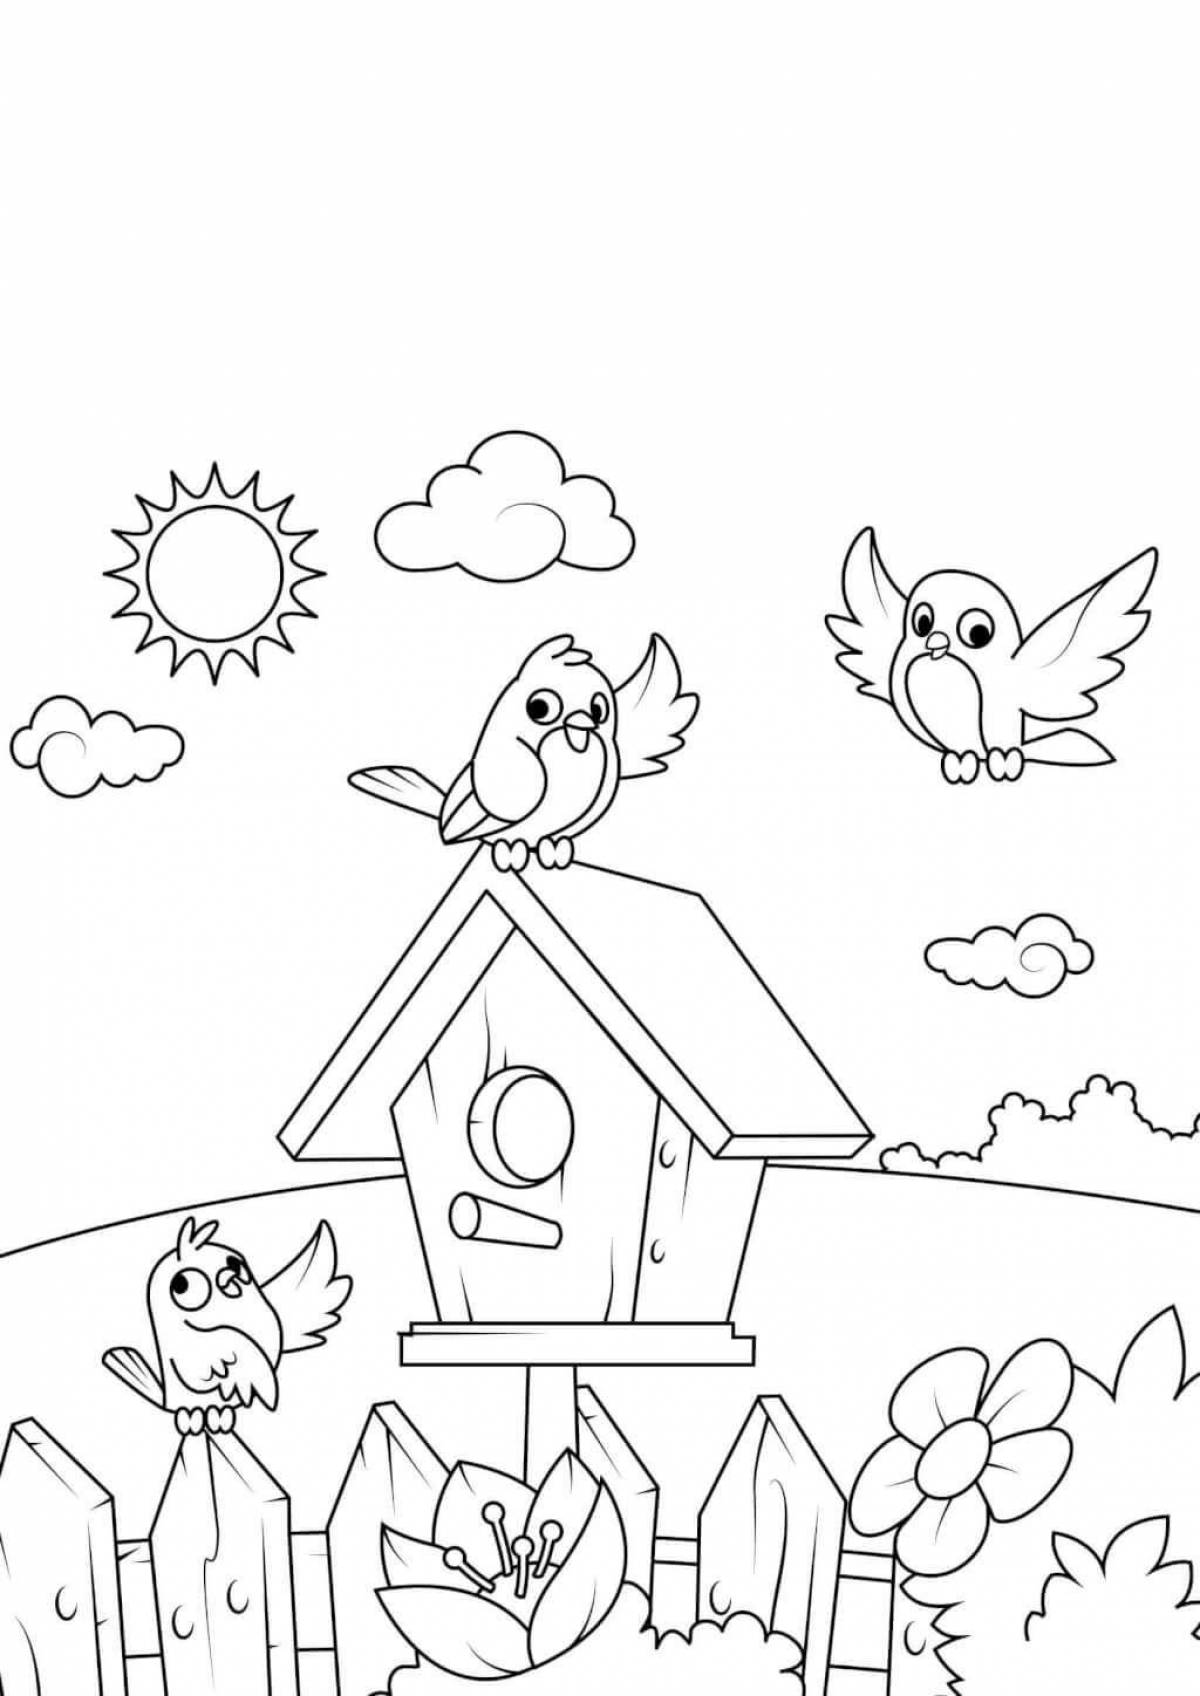 Adorable birdhouse coloring book for kids 3-4 years old